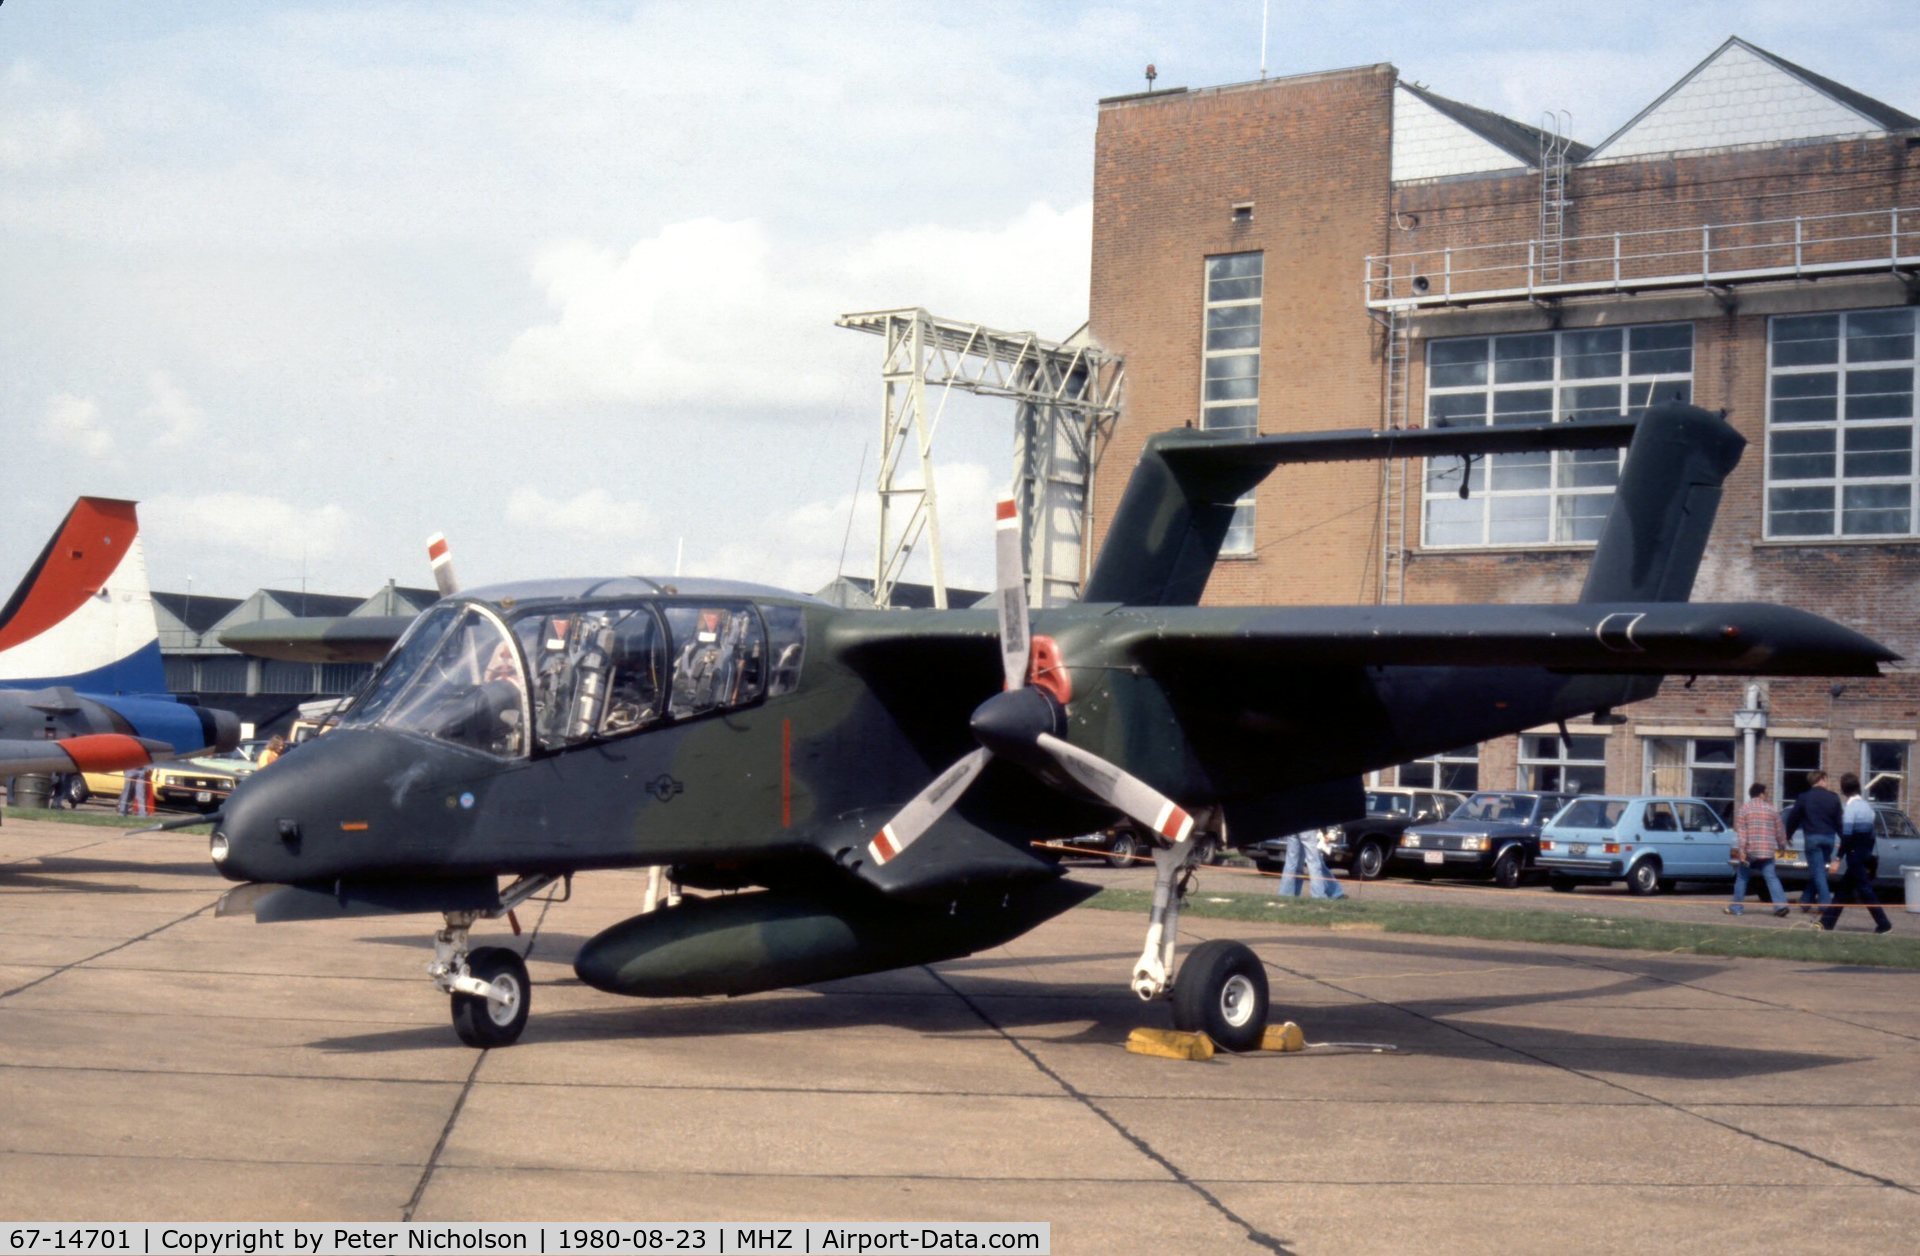 67-14701, 1967 North American OV-10A Bronco C/N 321-109, OV-10A Bronco of 601 Tactical Control Wing on display at the 1980 Mildenhall Air Fete.